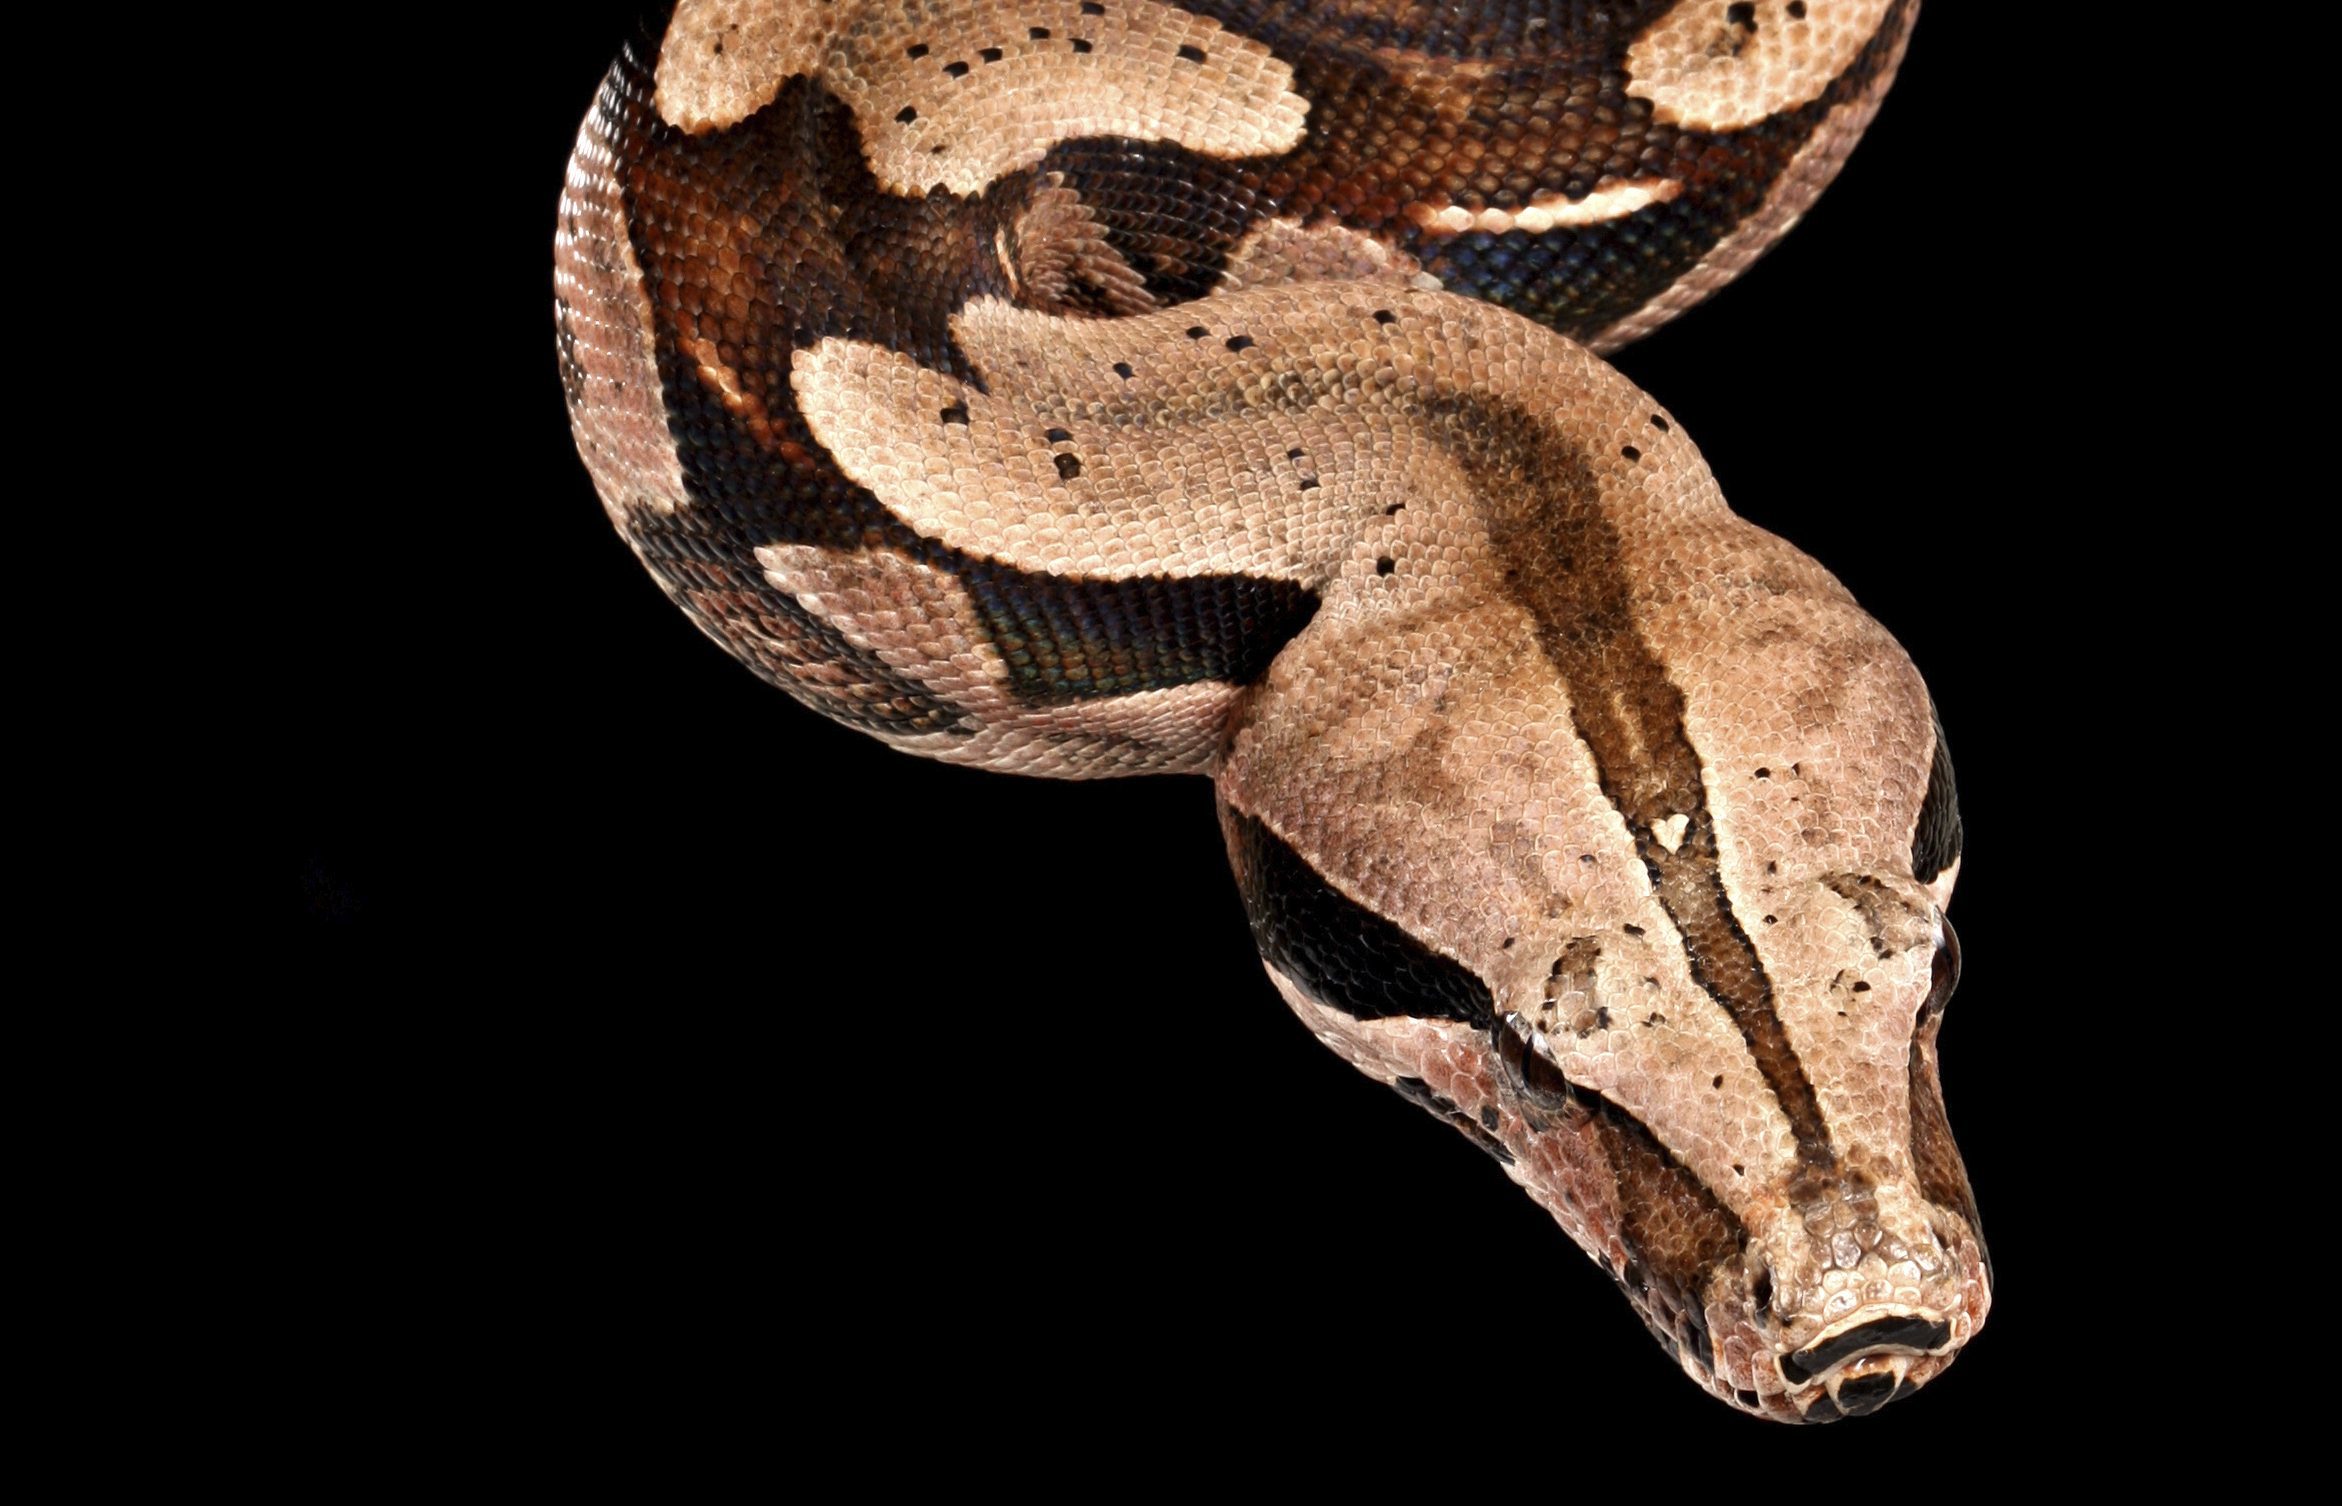 A Red Tail Boa hanging from a tree branch.